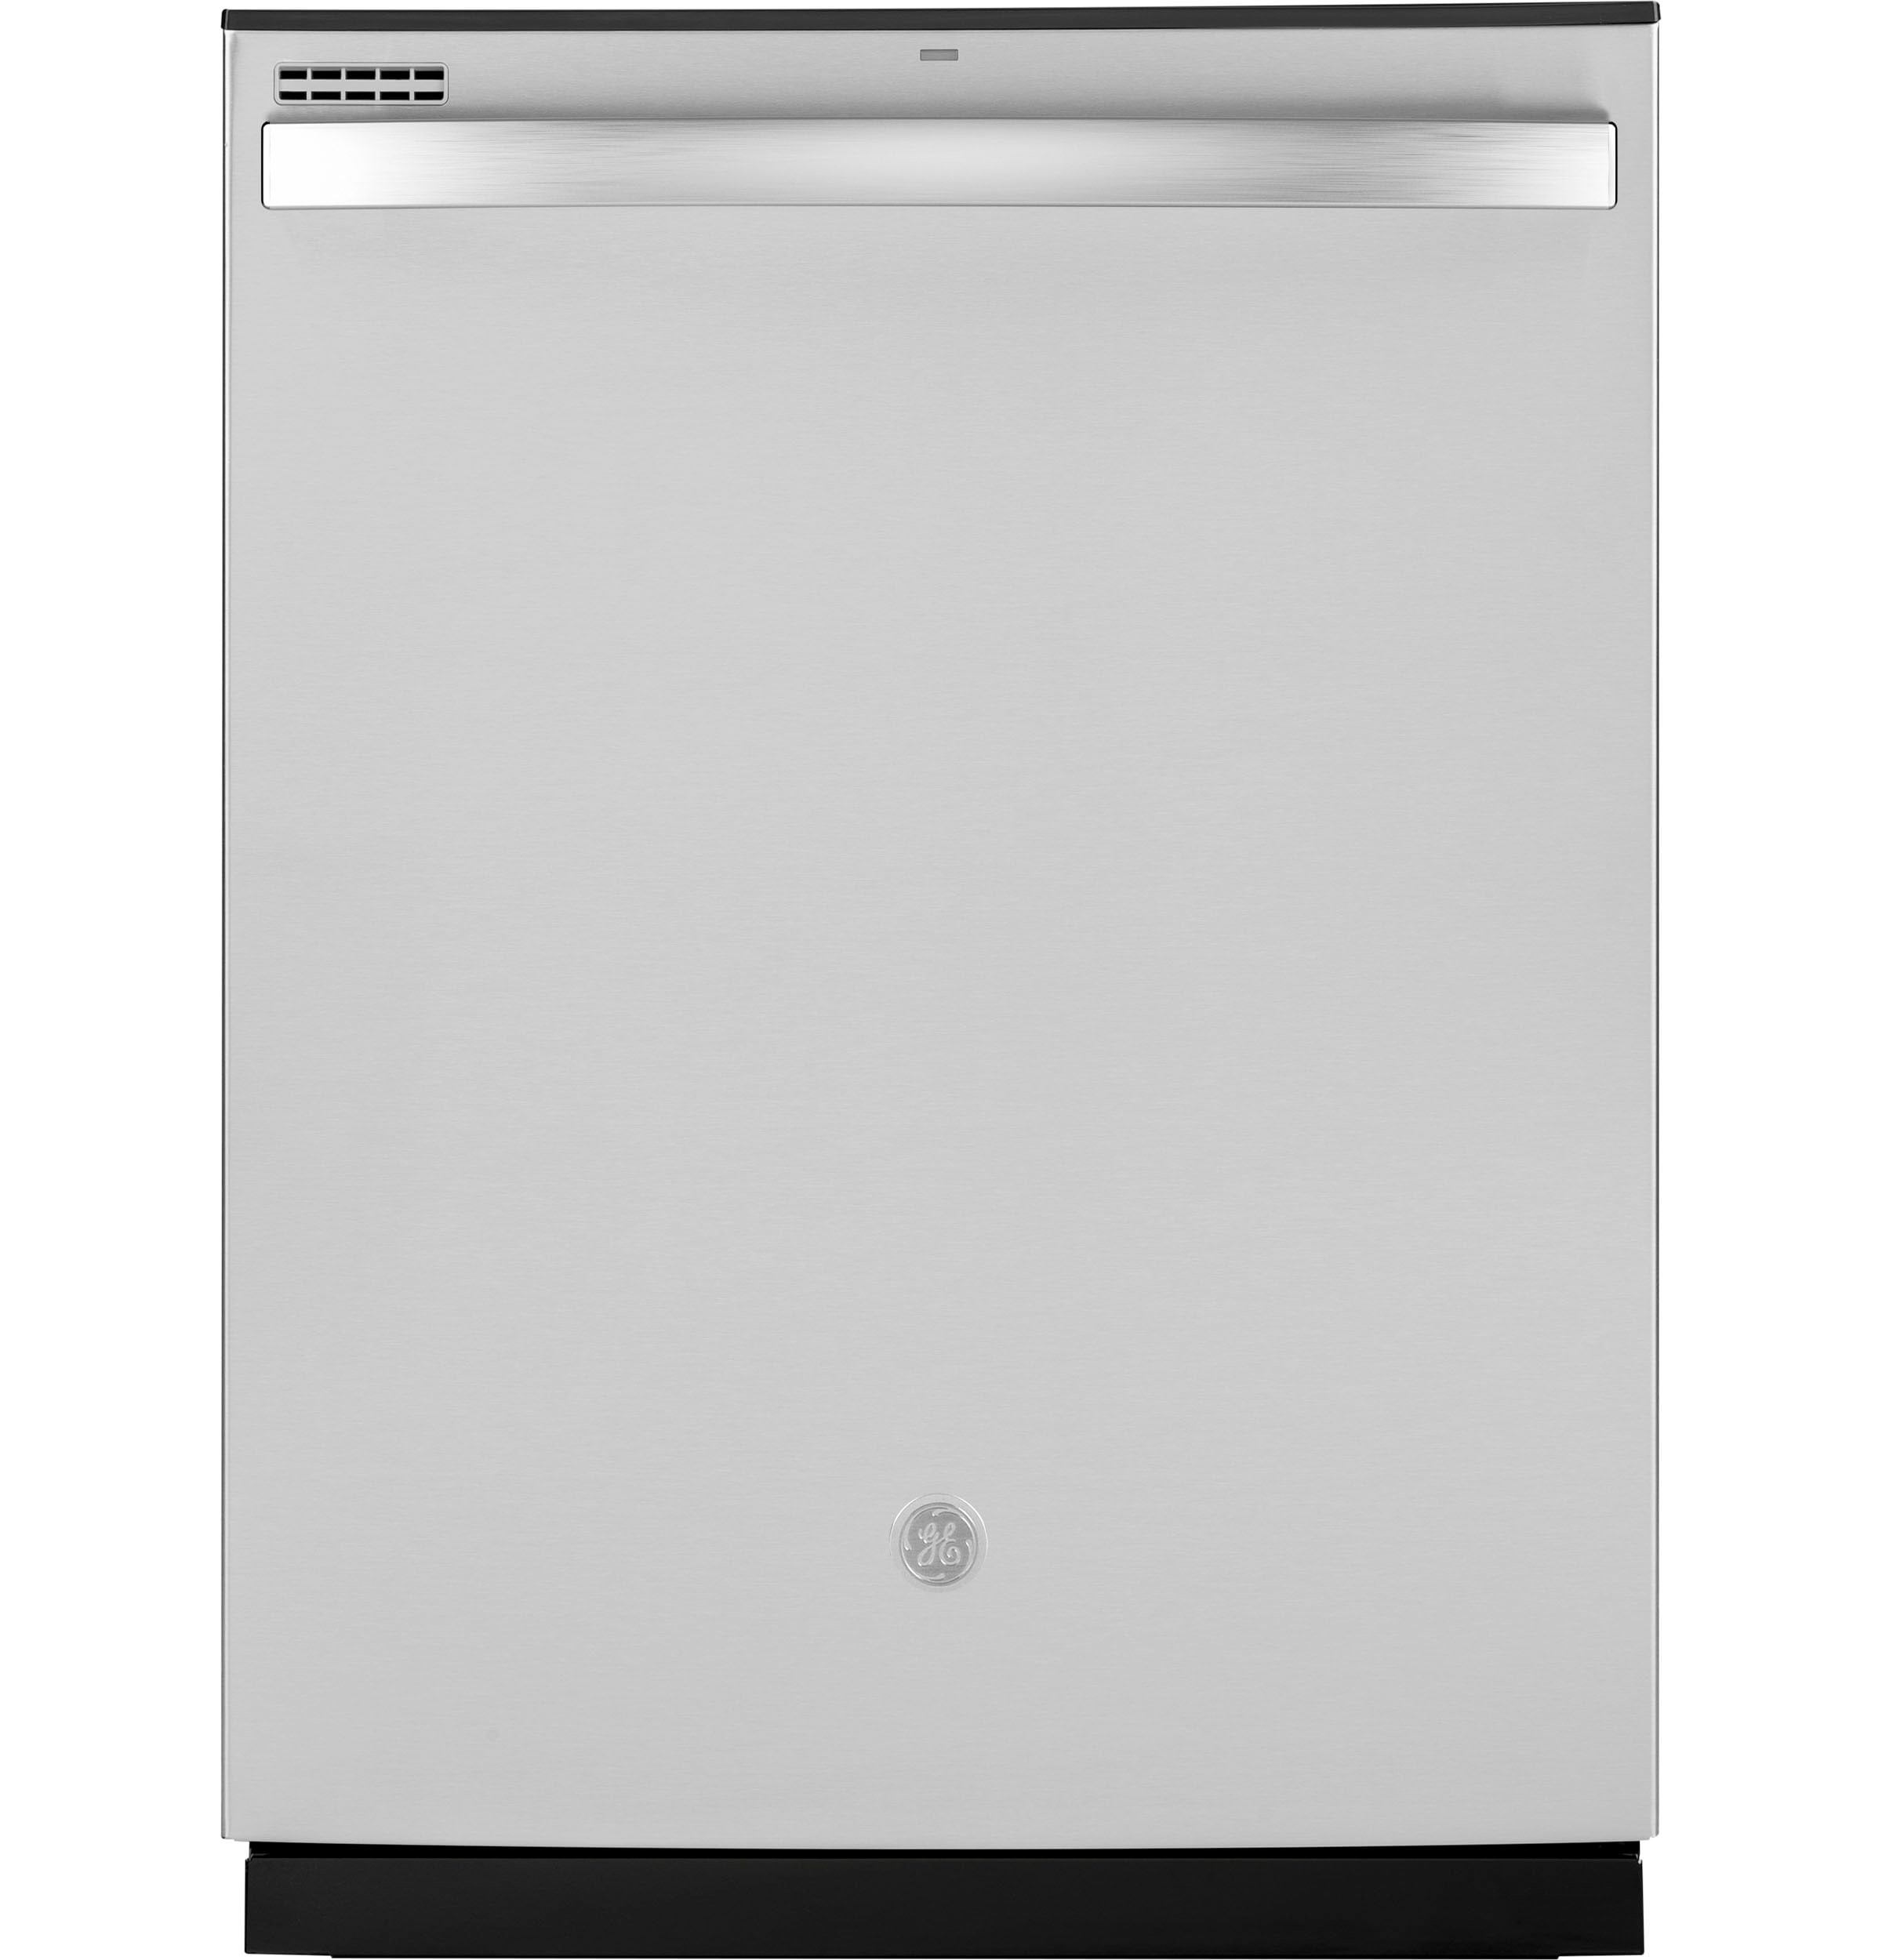 GE 24 in. in Stainless Steel Front Control Tall Tub Dishwasher with Steam  Clean for sale online